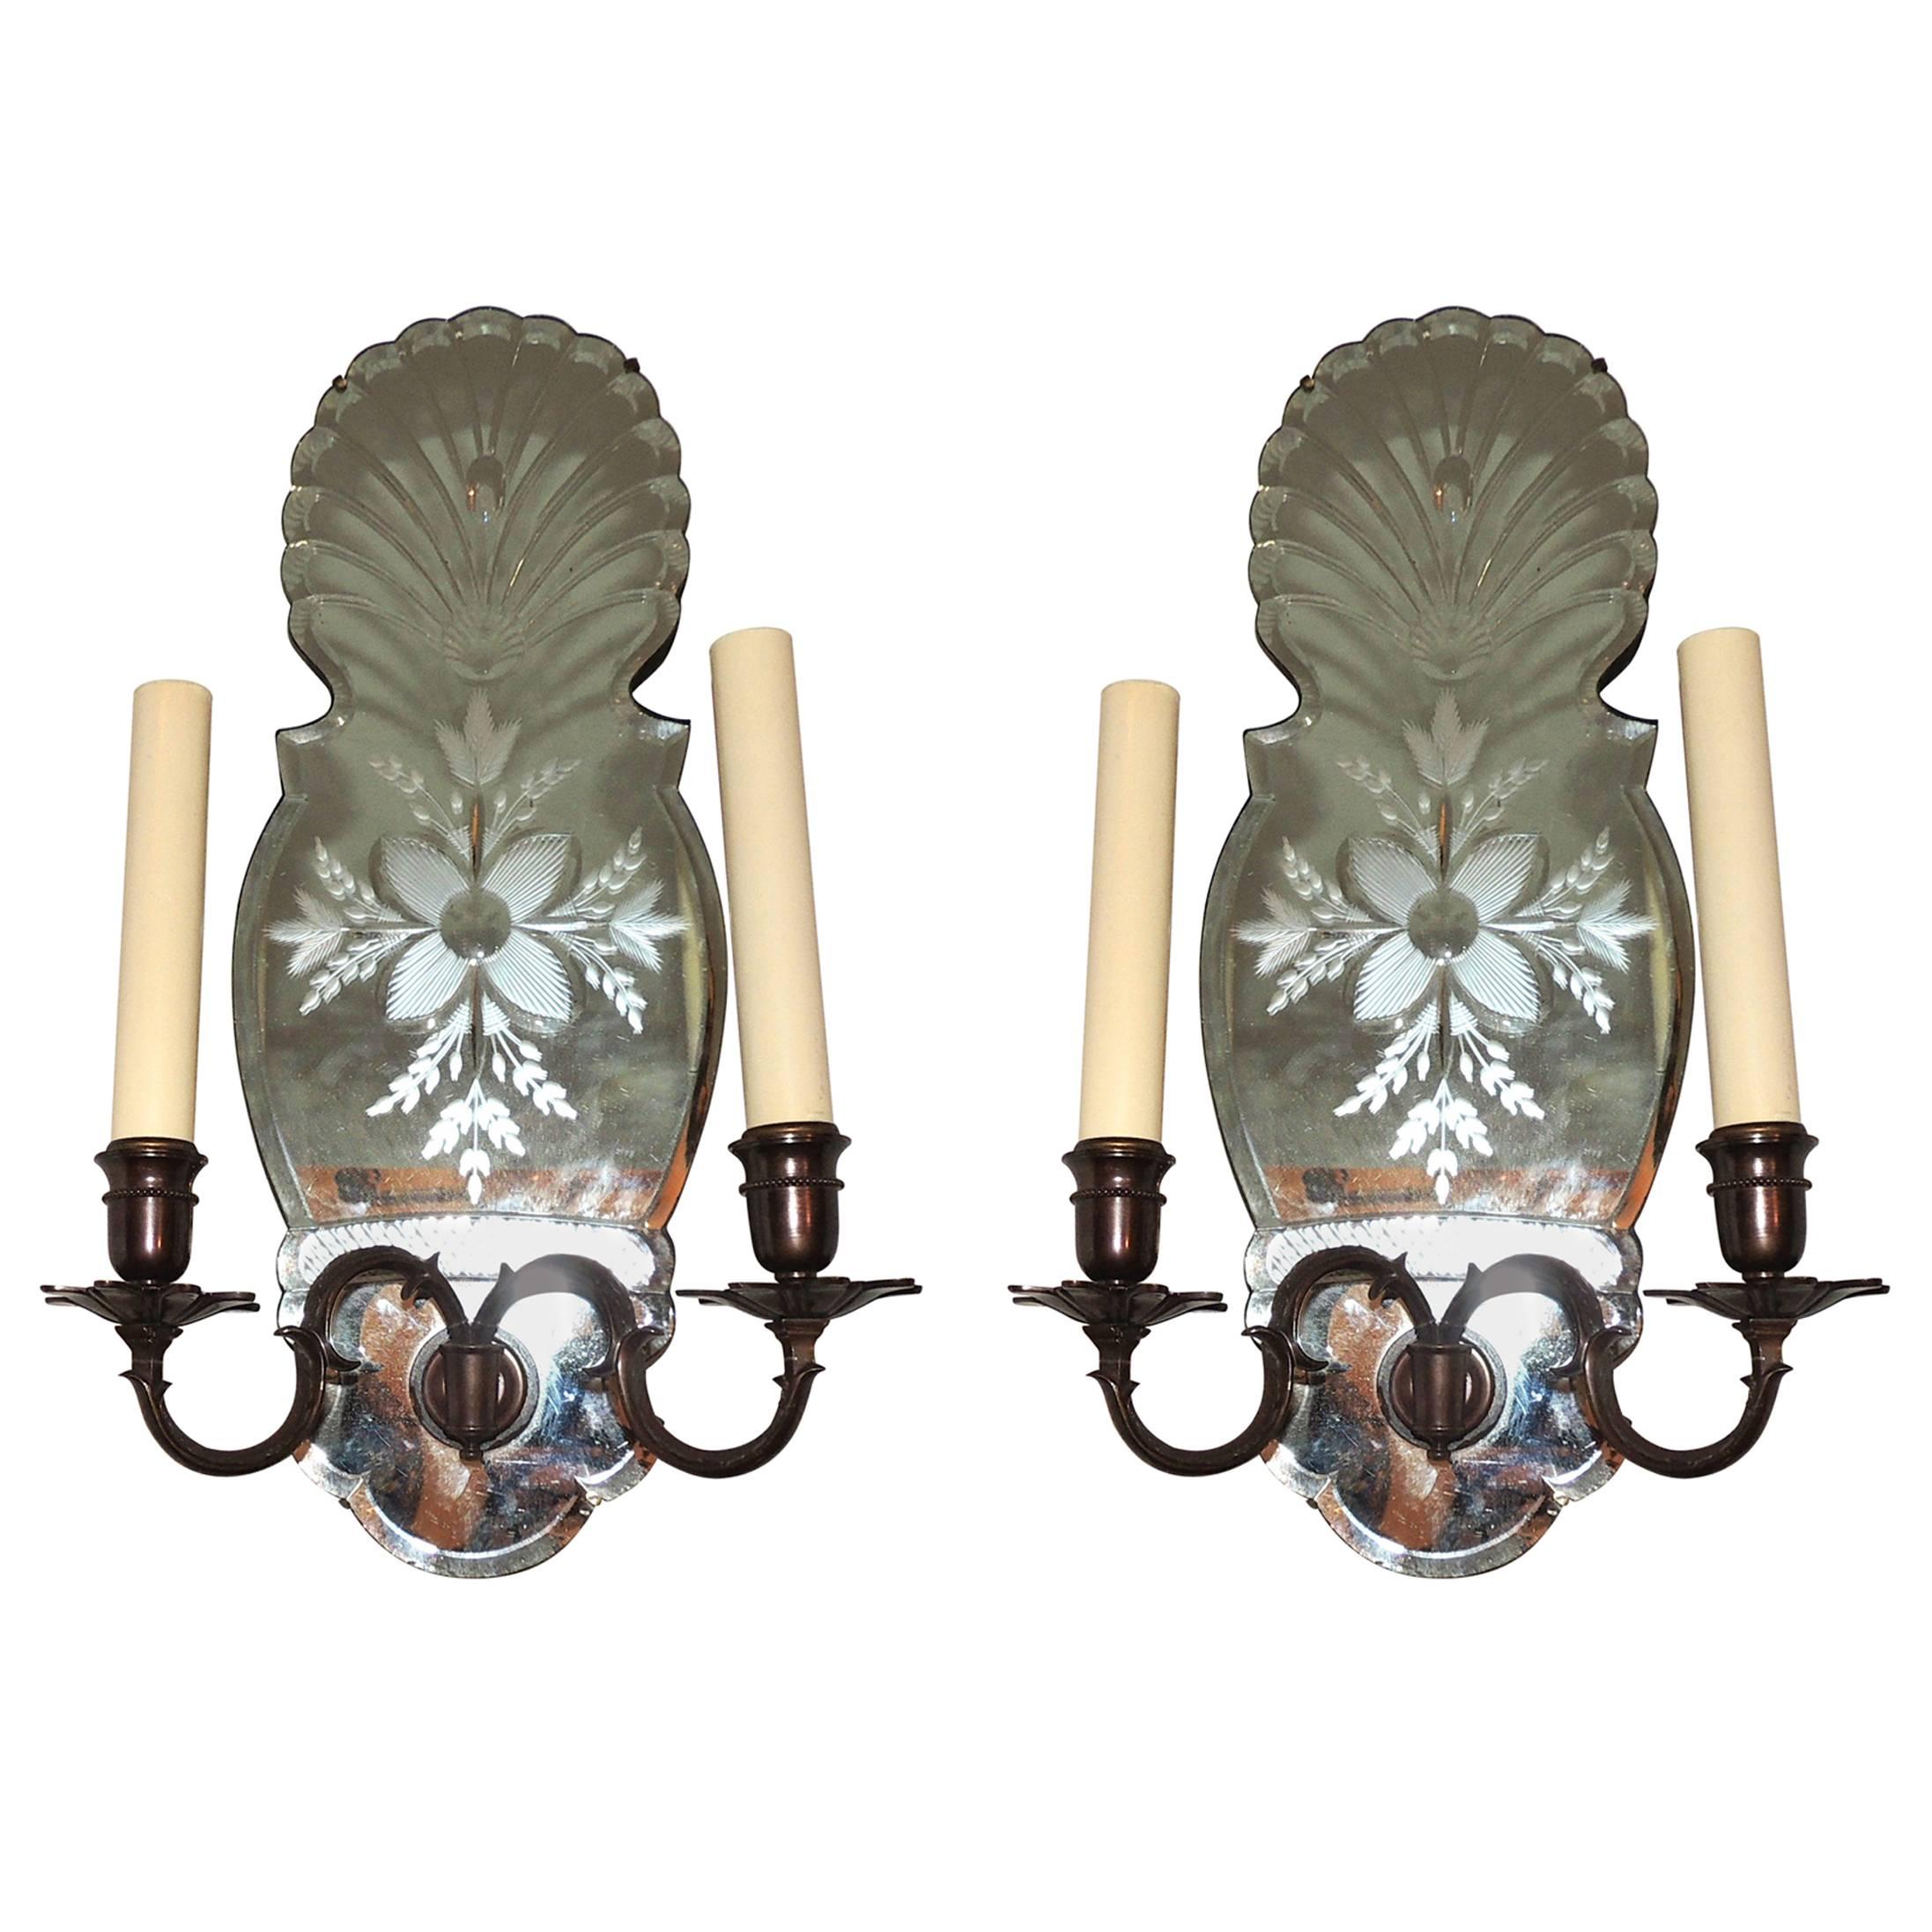 Wonderful Pair Etched Floral Mirror Back Two-Light Bronze Caldwell Sconces